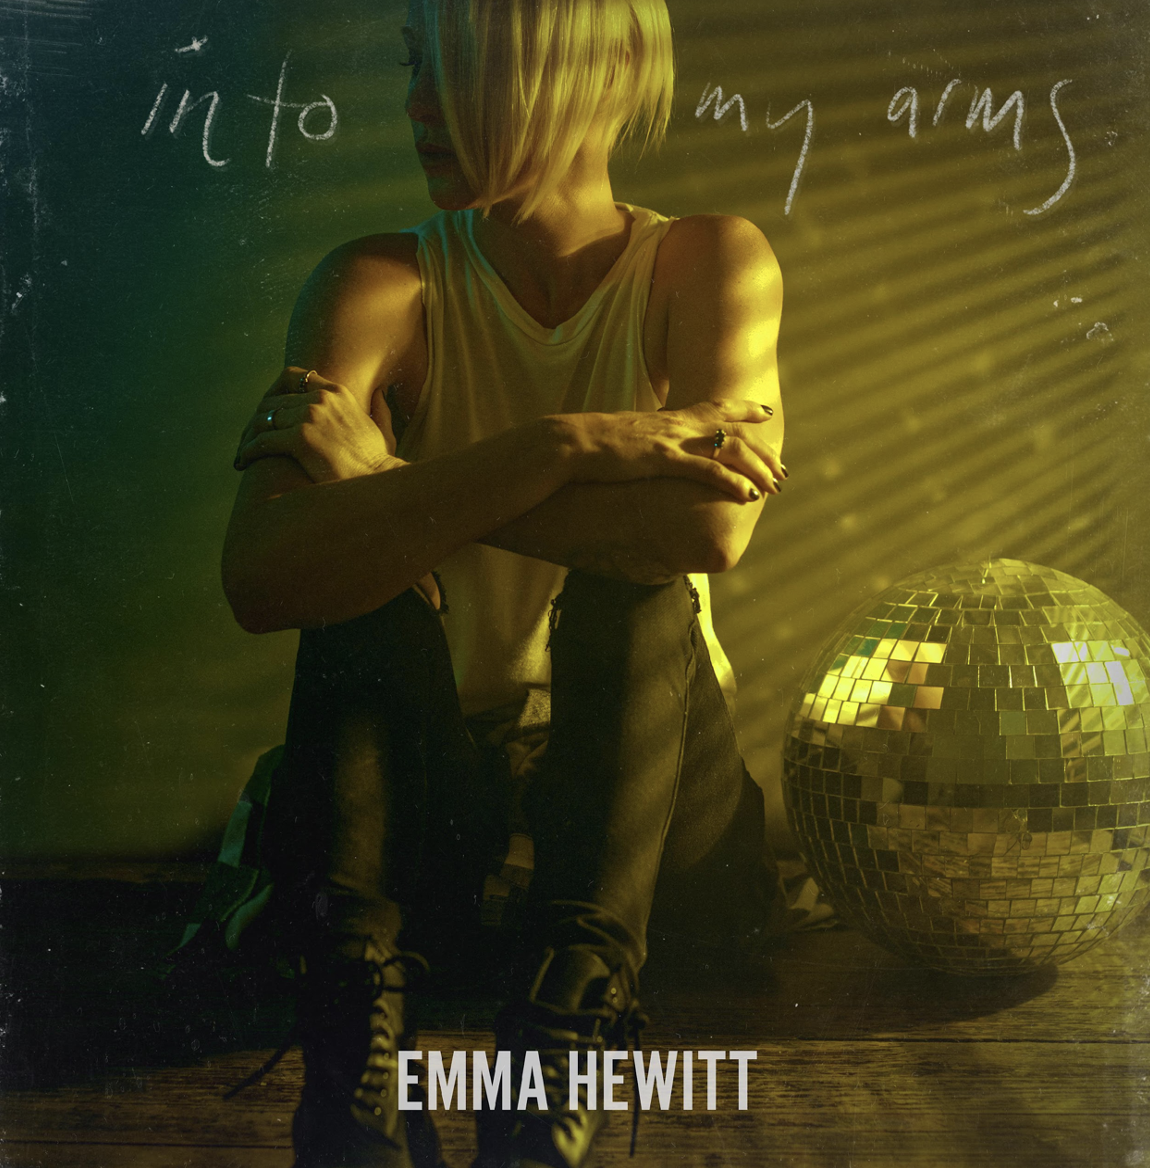 Emma Hewitt presents Into My Arms on Black Hole Recordings